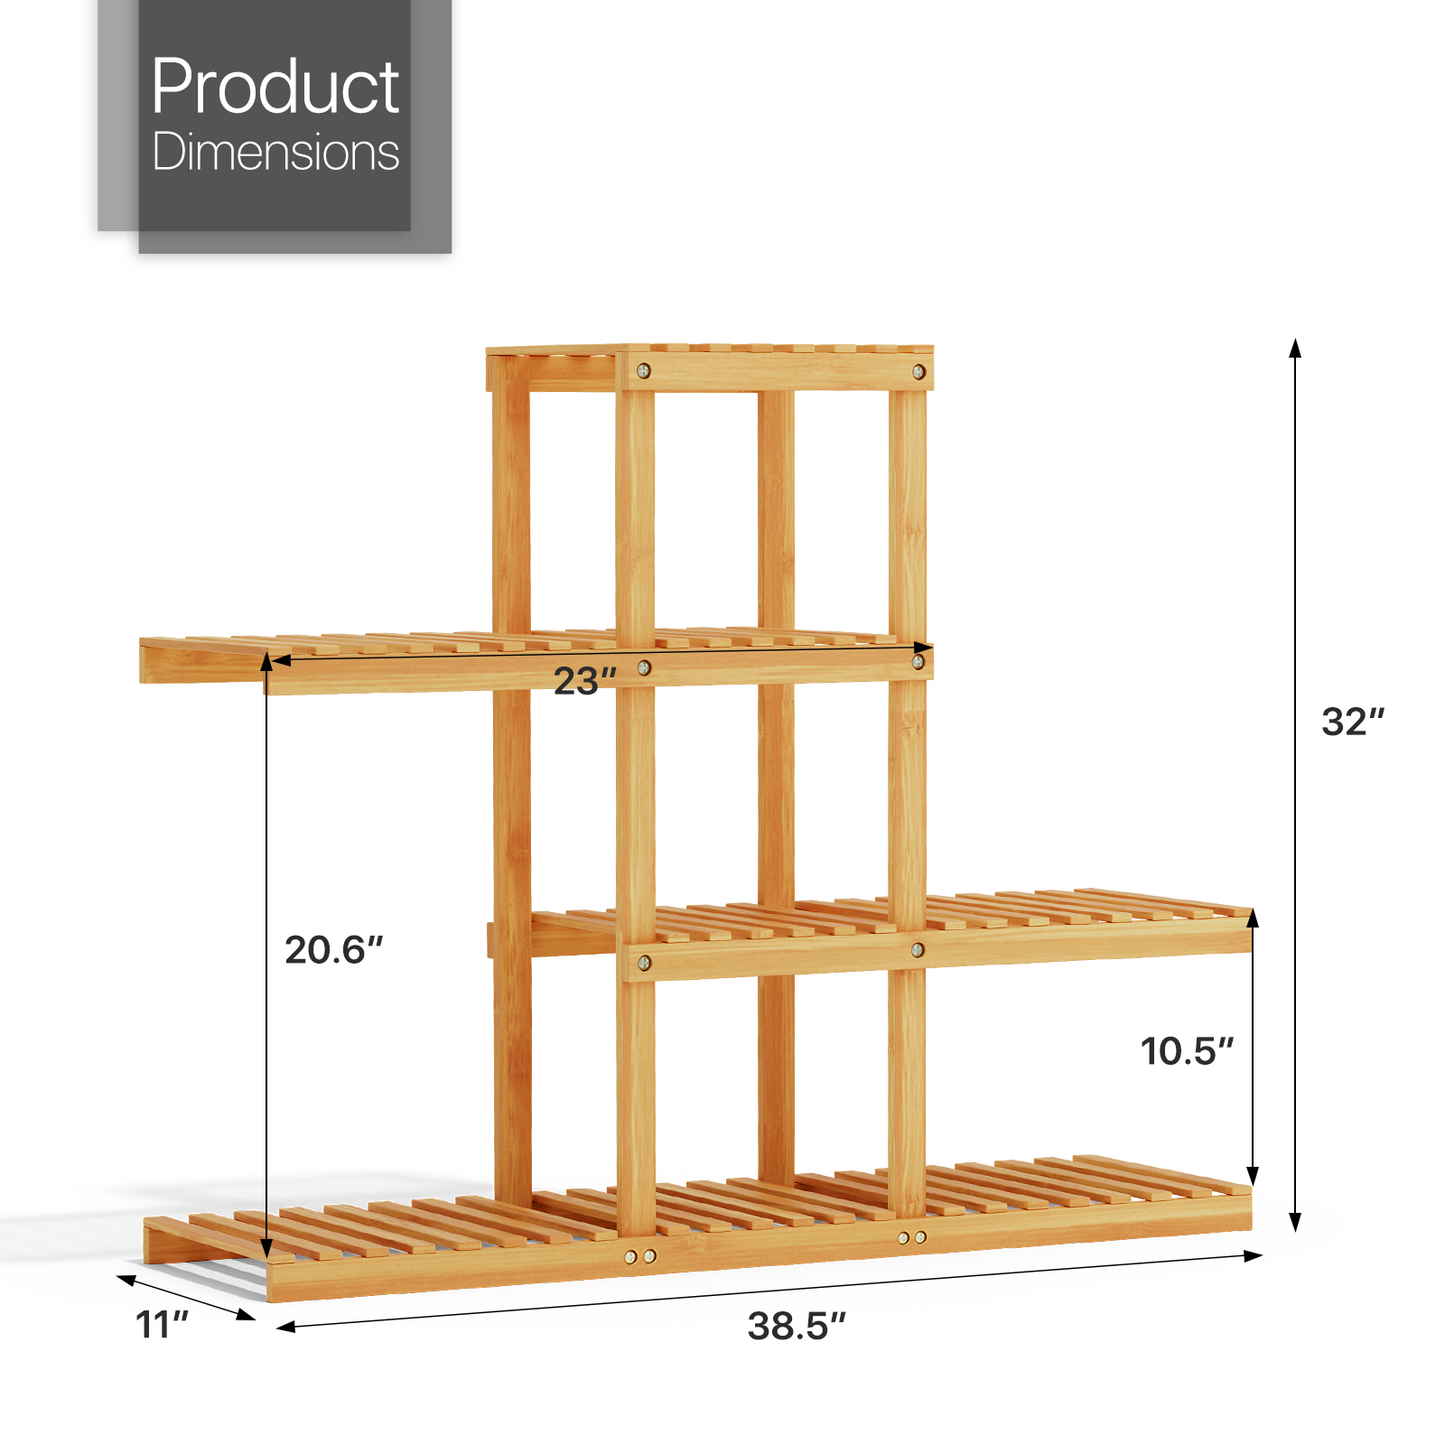 38" Carbonized Wooden Plant Rack - Brown